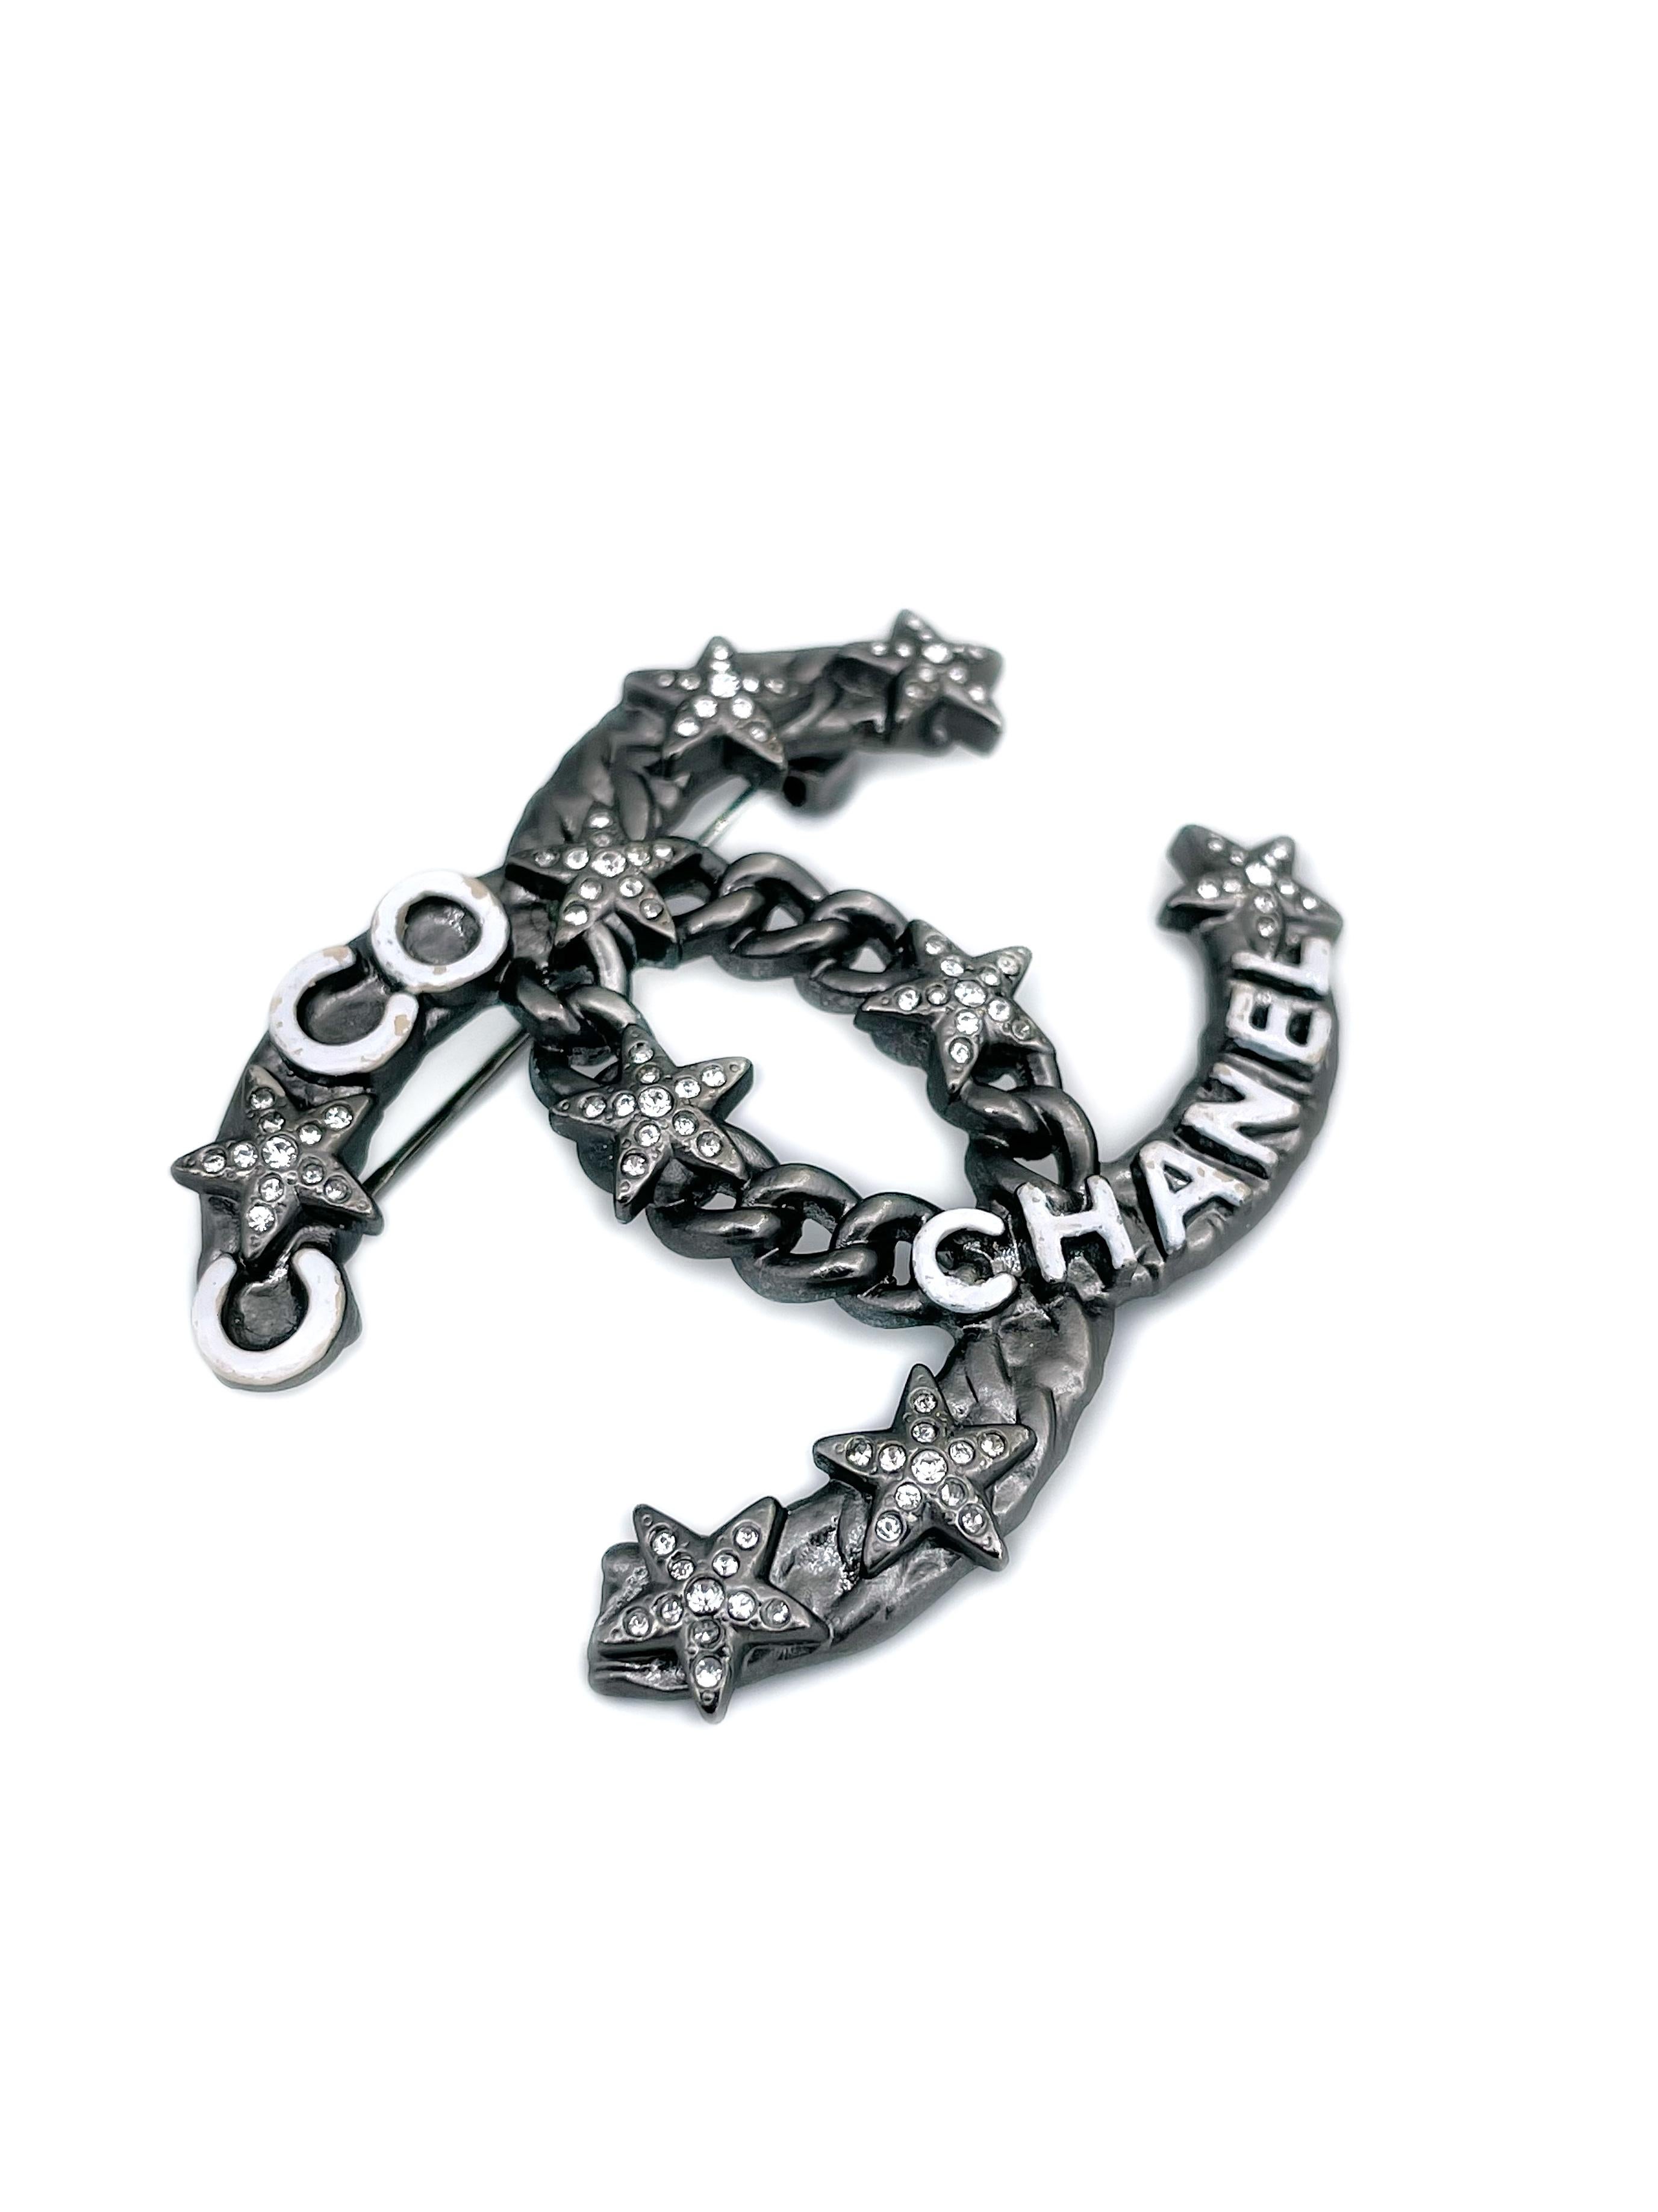 This is a CC logo pin brooch designed by Chanel for 2022 collection. It is adorned with stars encrusted with clear crystals and white enamel letters forming into “Coco Chanel”. 

Signed: ©Chanel® A22P. Made in France

Size: 4x5cm

———

If you have